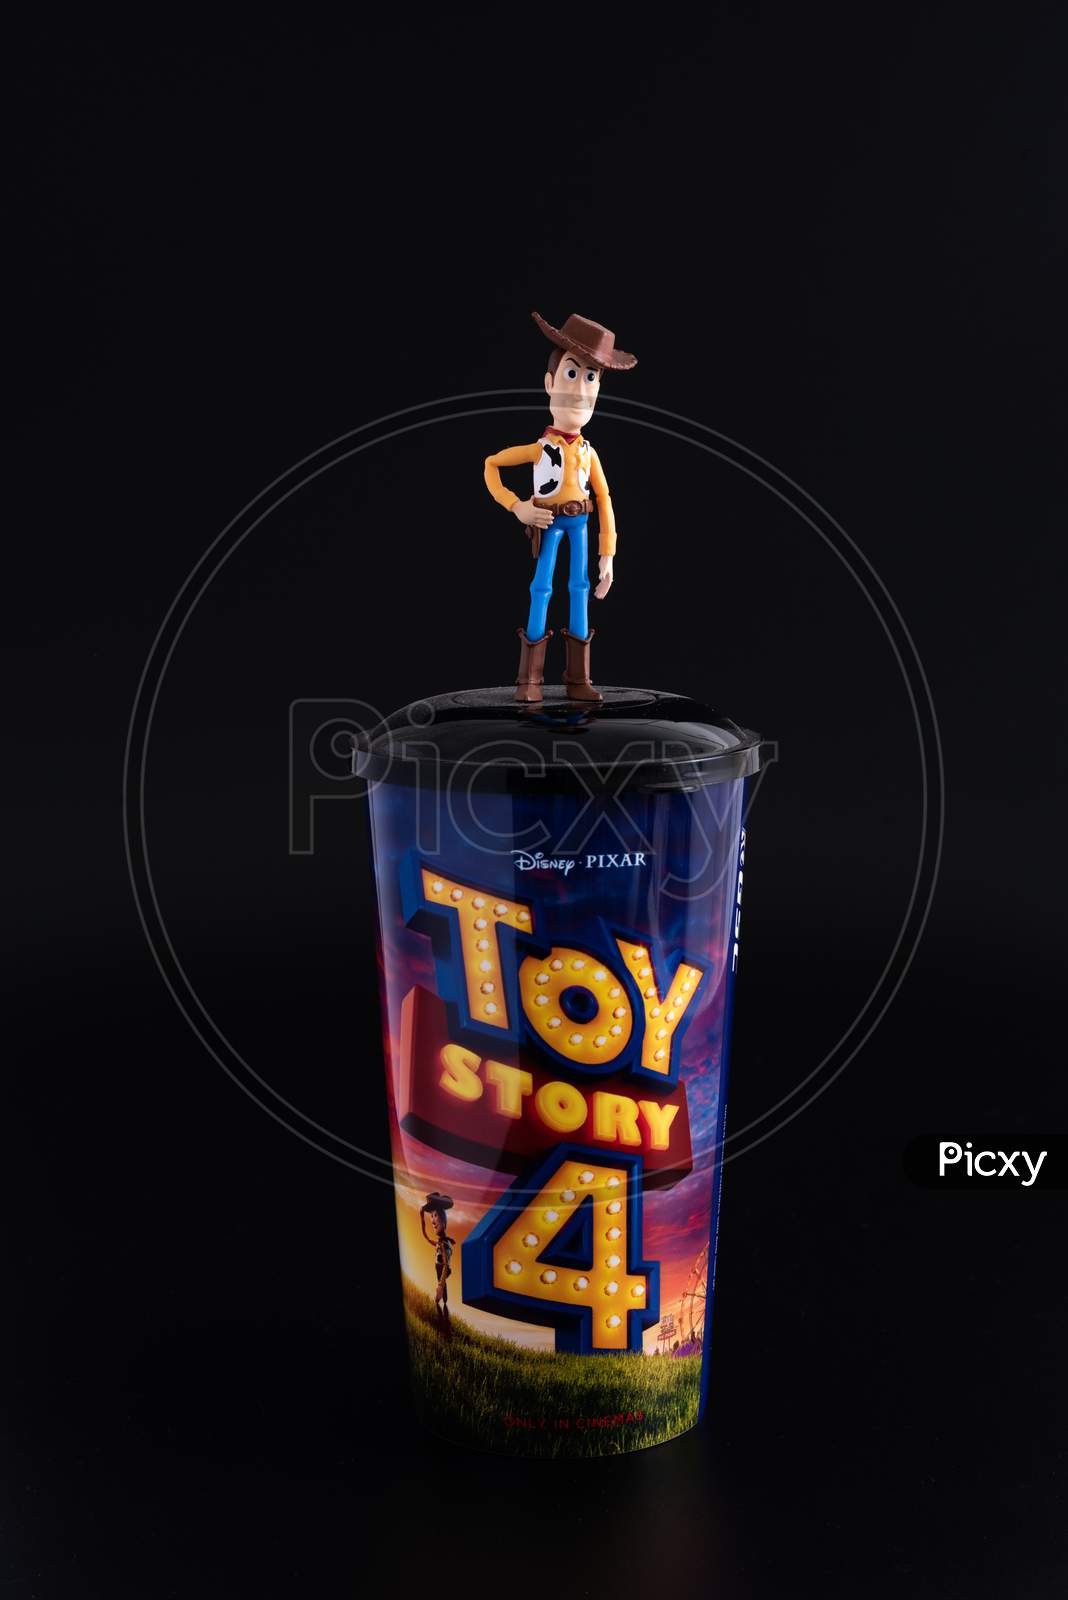 Kuala Lumpur/Malaysia - May 19 2019:  Toy Story 4 Cup/Tumbler From The Cinema Promotion On The Black Background